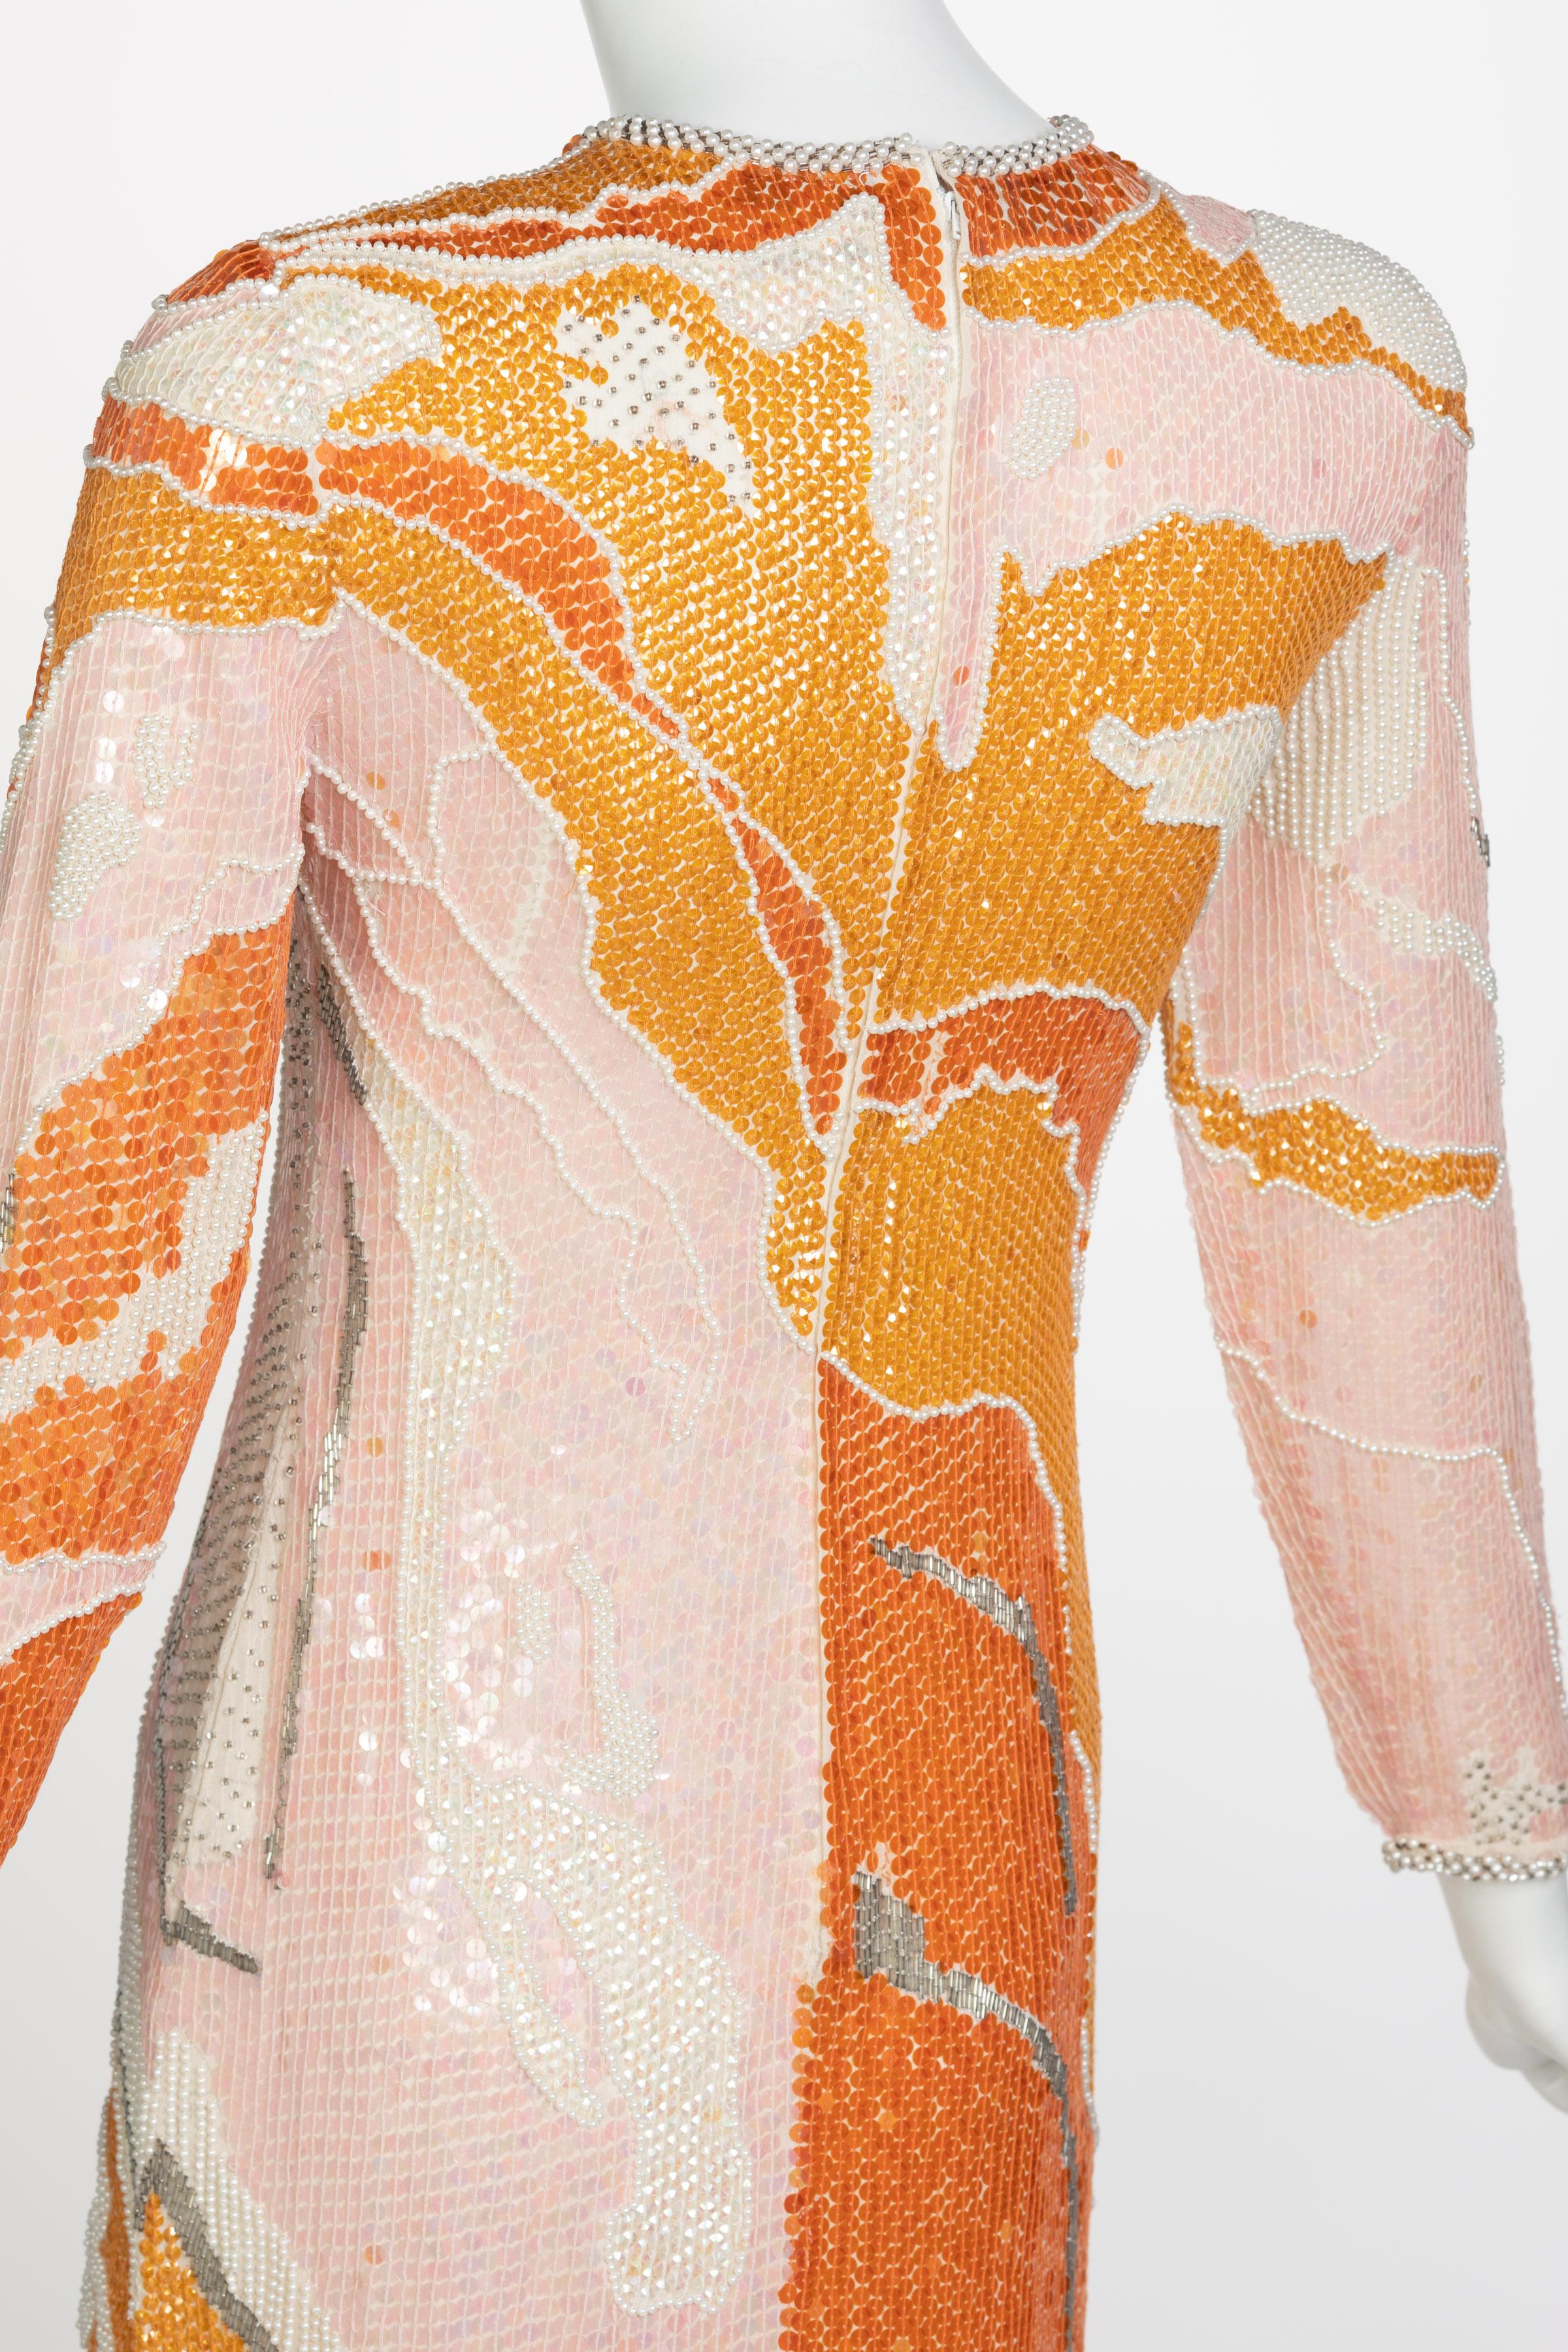 Halston Couture Sequin Pearl Beaded Sunset Colors Dress Documented, 1980s 4